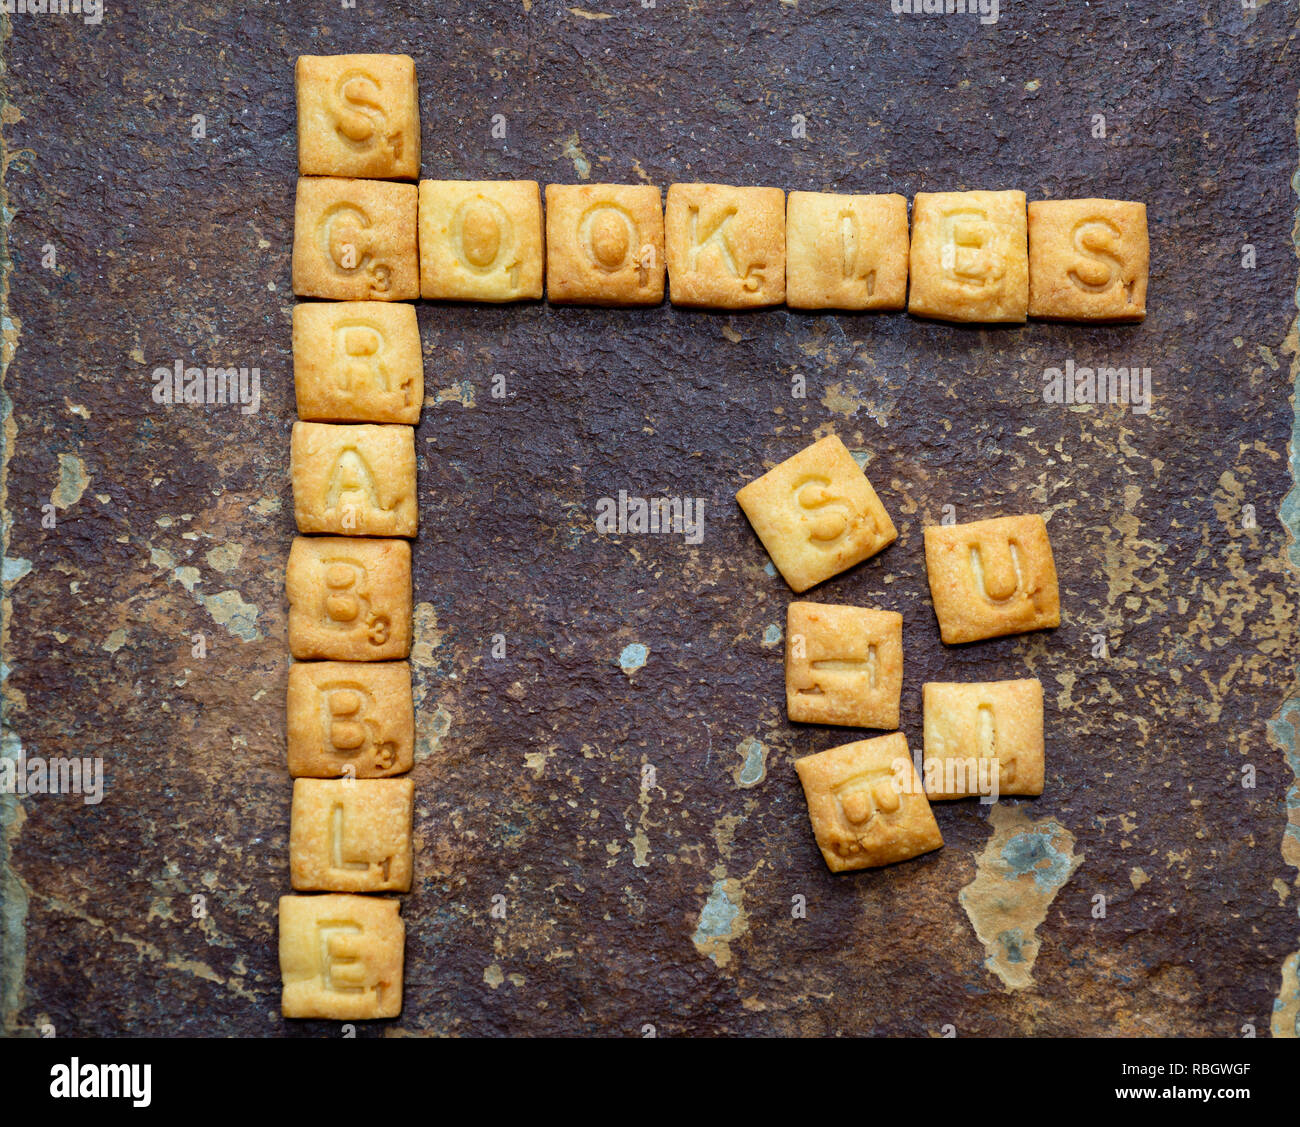 Scrabble cookies - scrabble words made from biscuits / cookies. Stock Photo